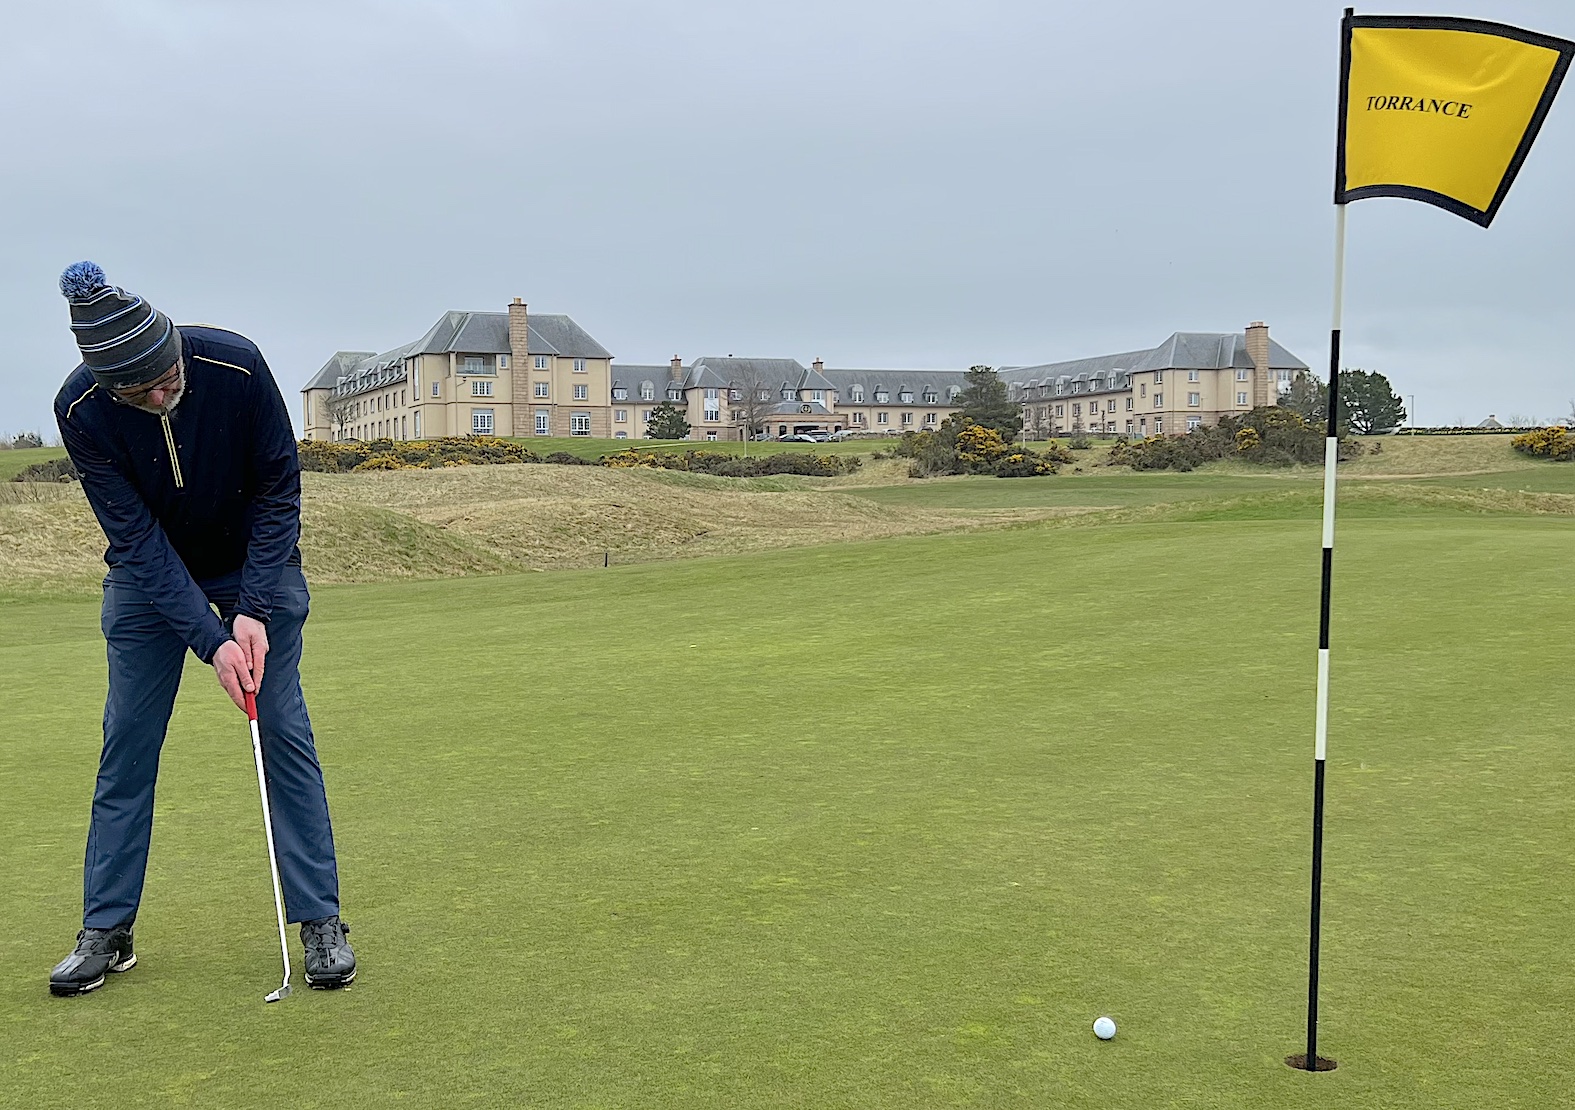 Mark Flanagan putting on the Torrance course at Fairmont St Andrews